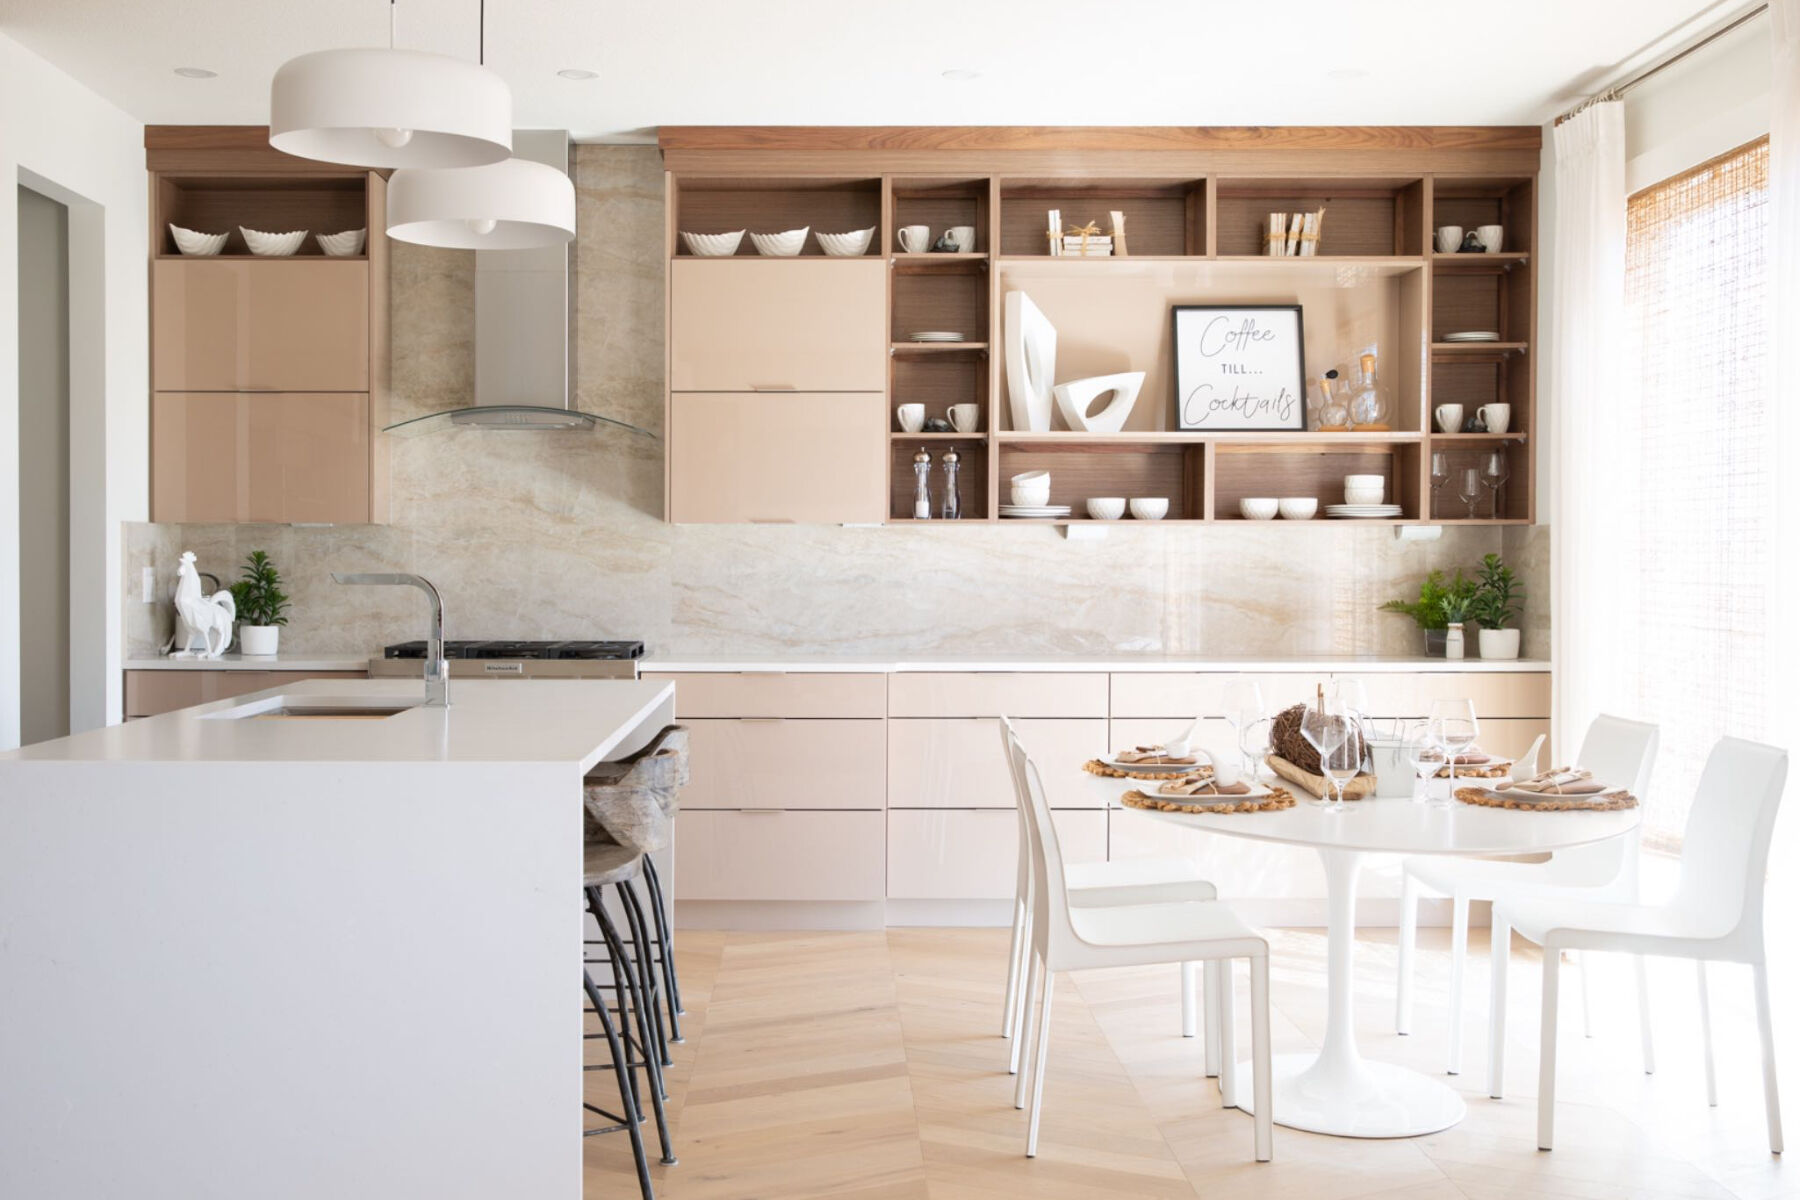 Kitchen and dining area with beige cabinets and drawers, and a white island and dining set.